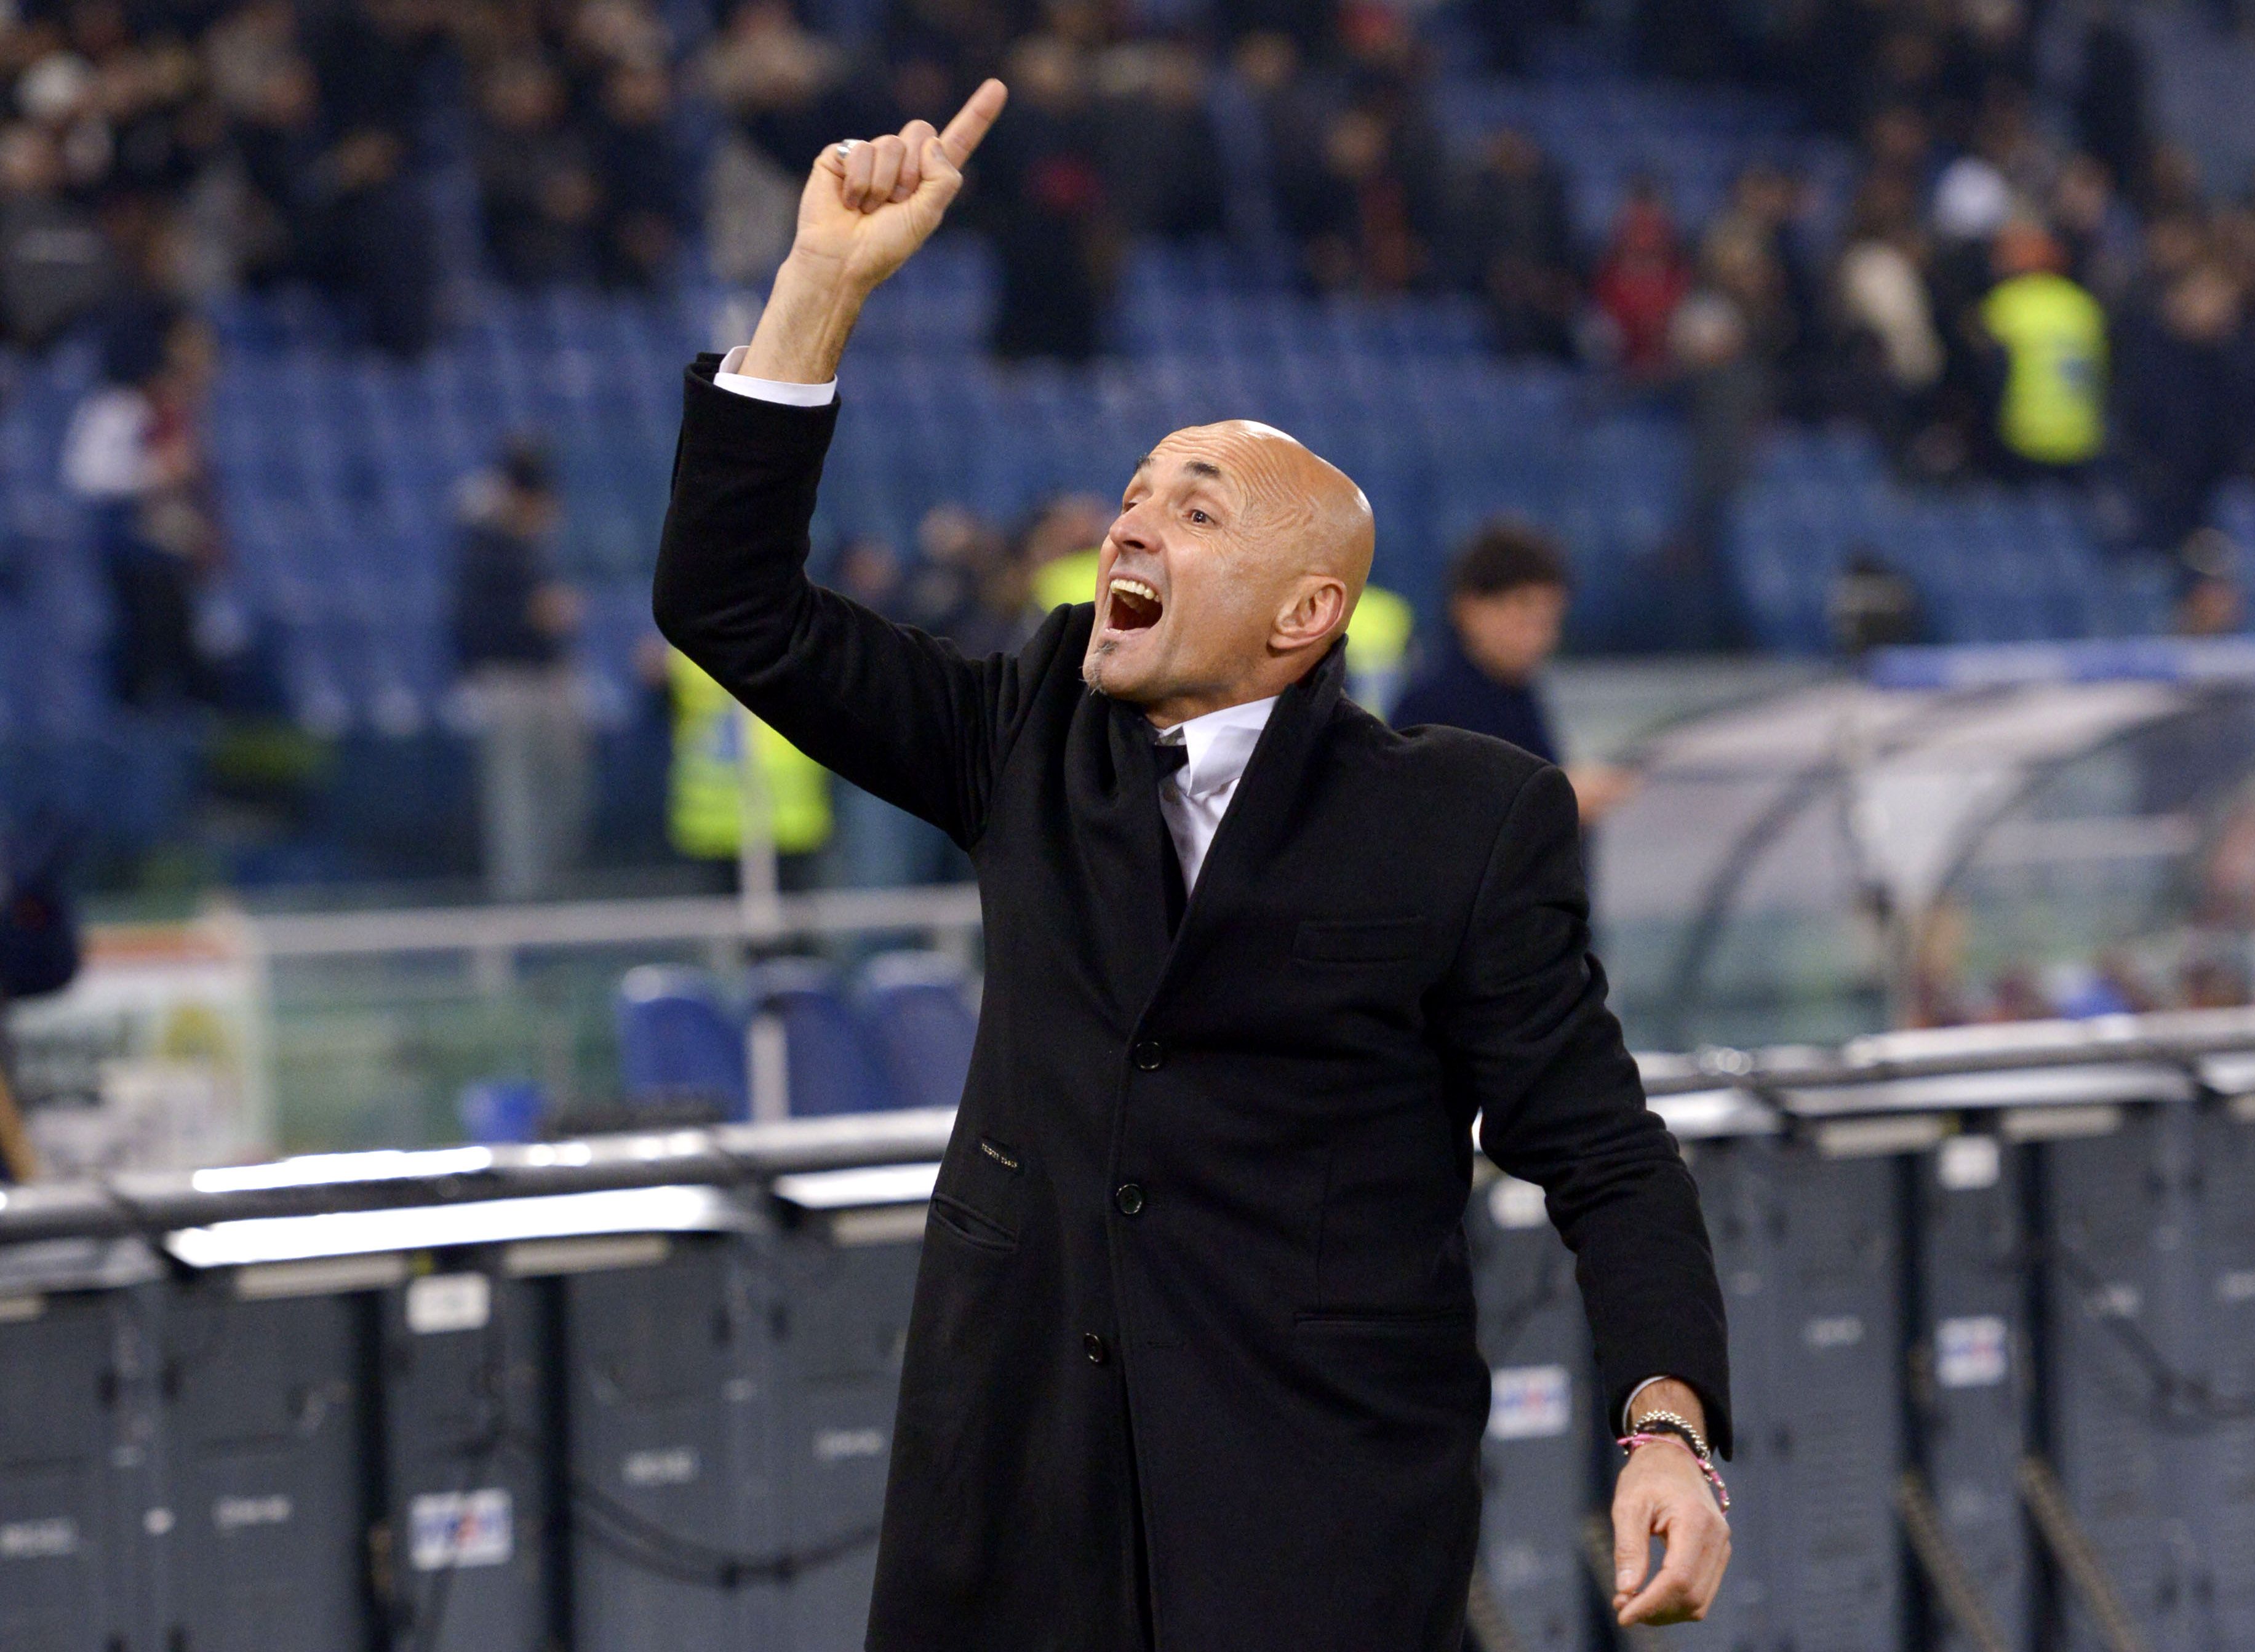 ROME, ITALY - DECEMBER 22: AS Roma Coach Luciano Spalletti celebrates the victory after the Serie A match between AS Roma and AC ChievoVerona at Stadio Olimpico on December 22, 2016 in Rome, Italy. (Photo by Luciano Rossi/AS Roma via Getty Images)